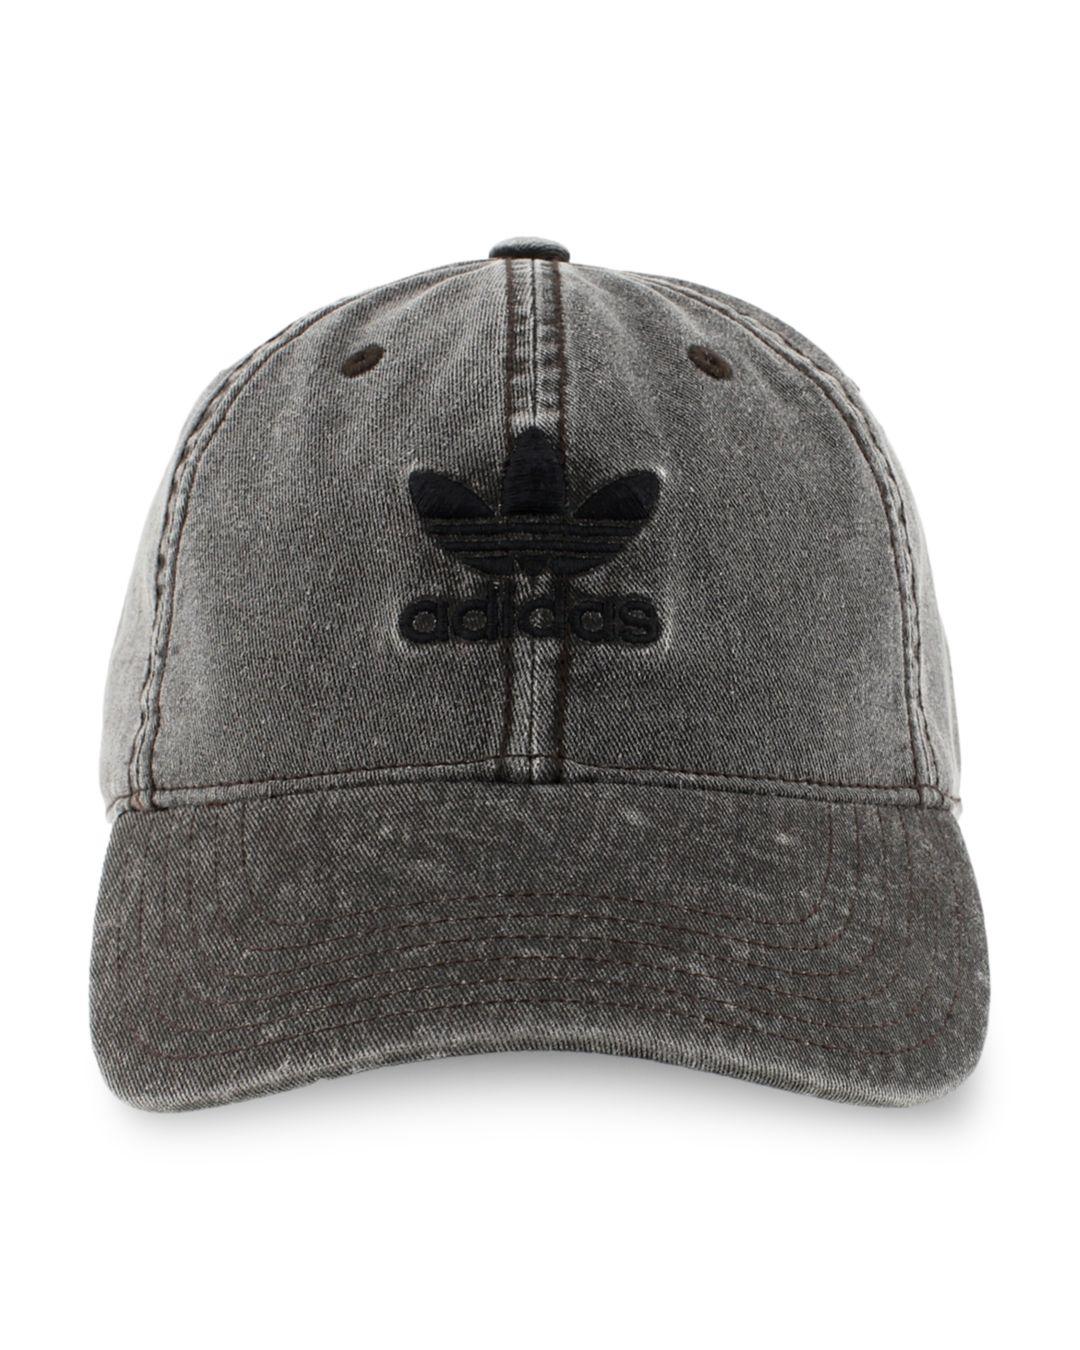 adidas Originals Denim Relaxed Hat in Charcoal (Gray) for Men - Lyst